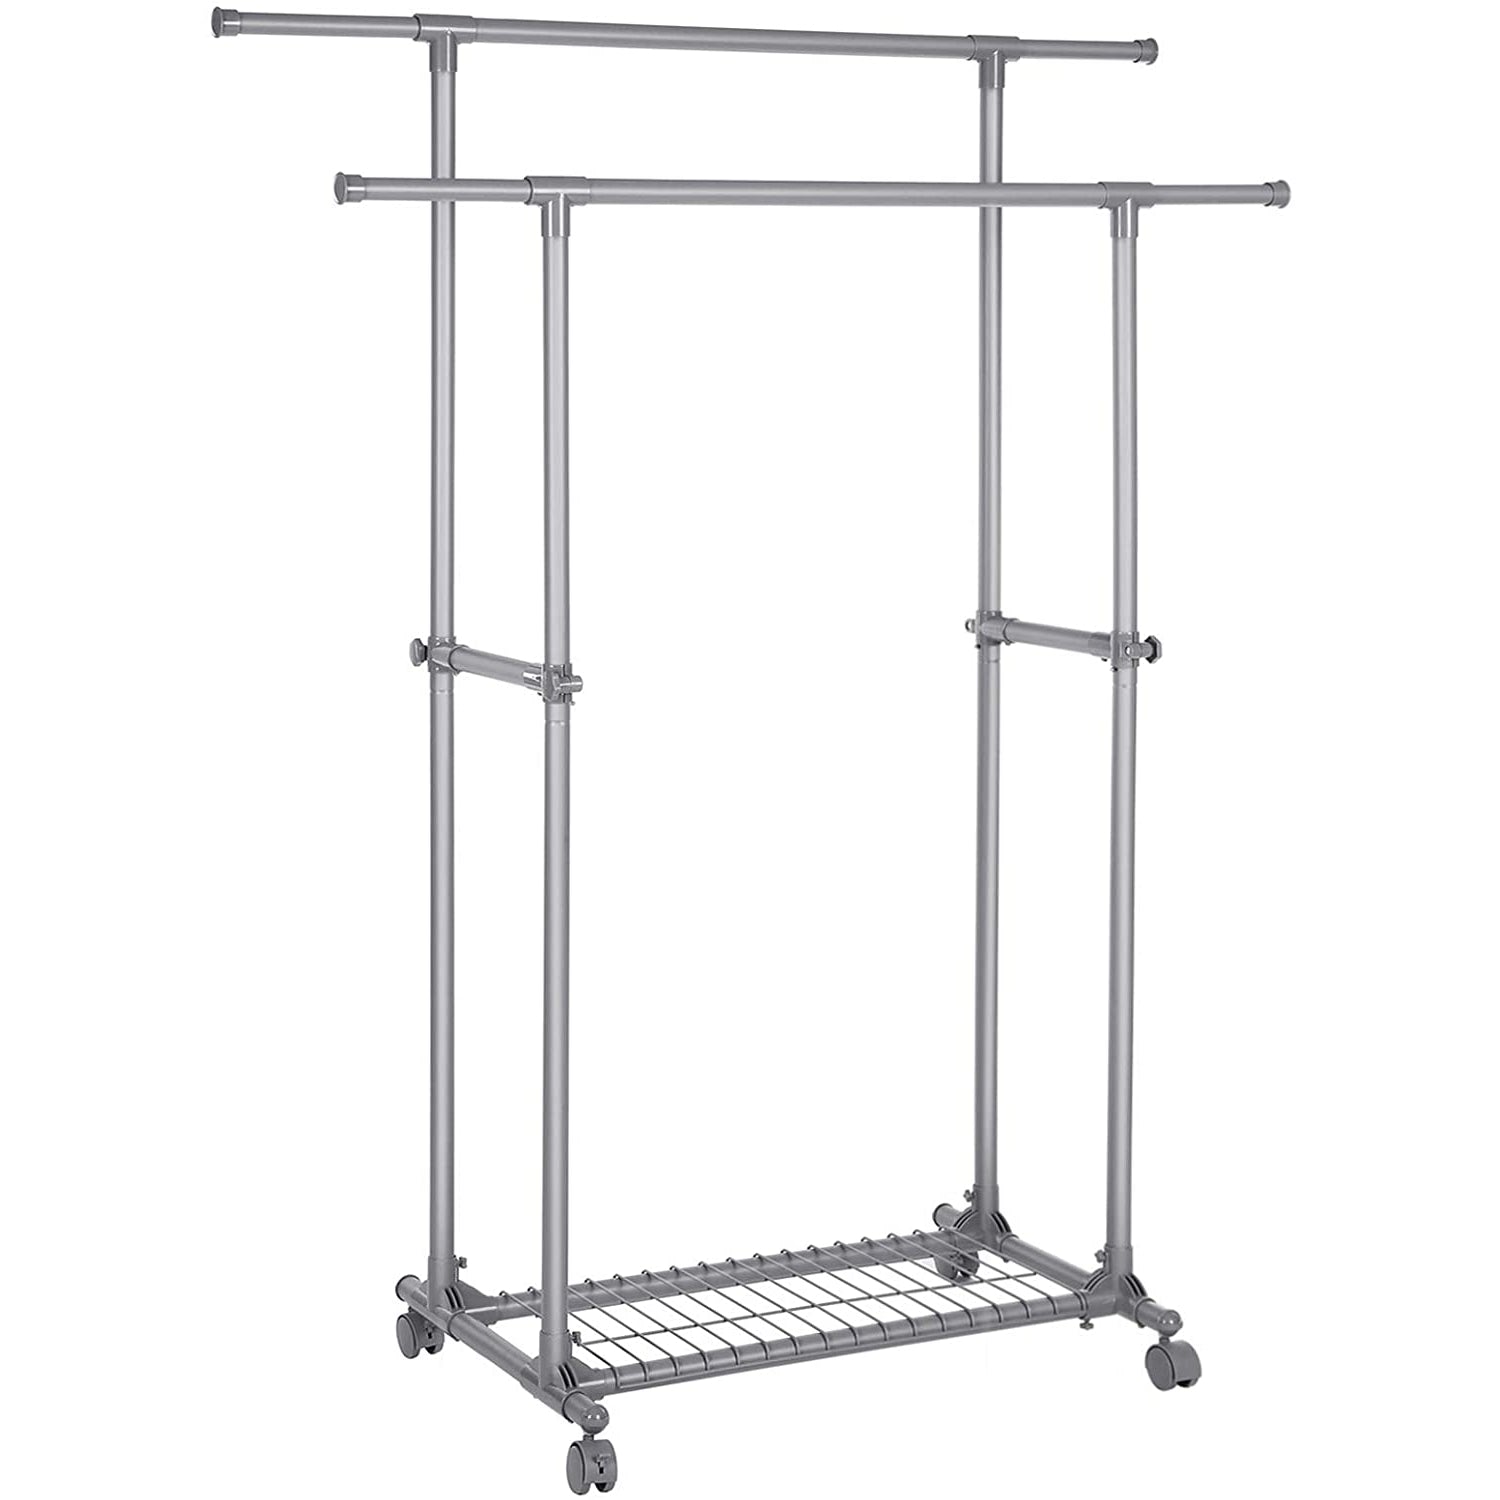 Nancy's Clothes rack on wheels - Extendable coat rack with double rod - Mobile - Clothes racks - Max. load 70 kg - (87-150) x 52 x 166 cm - Gray